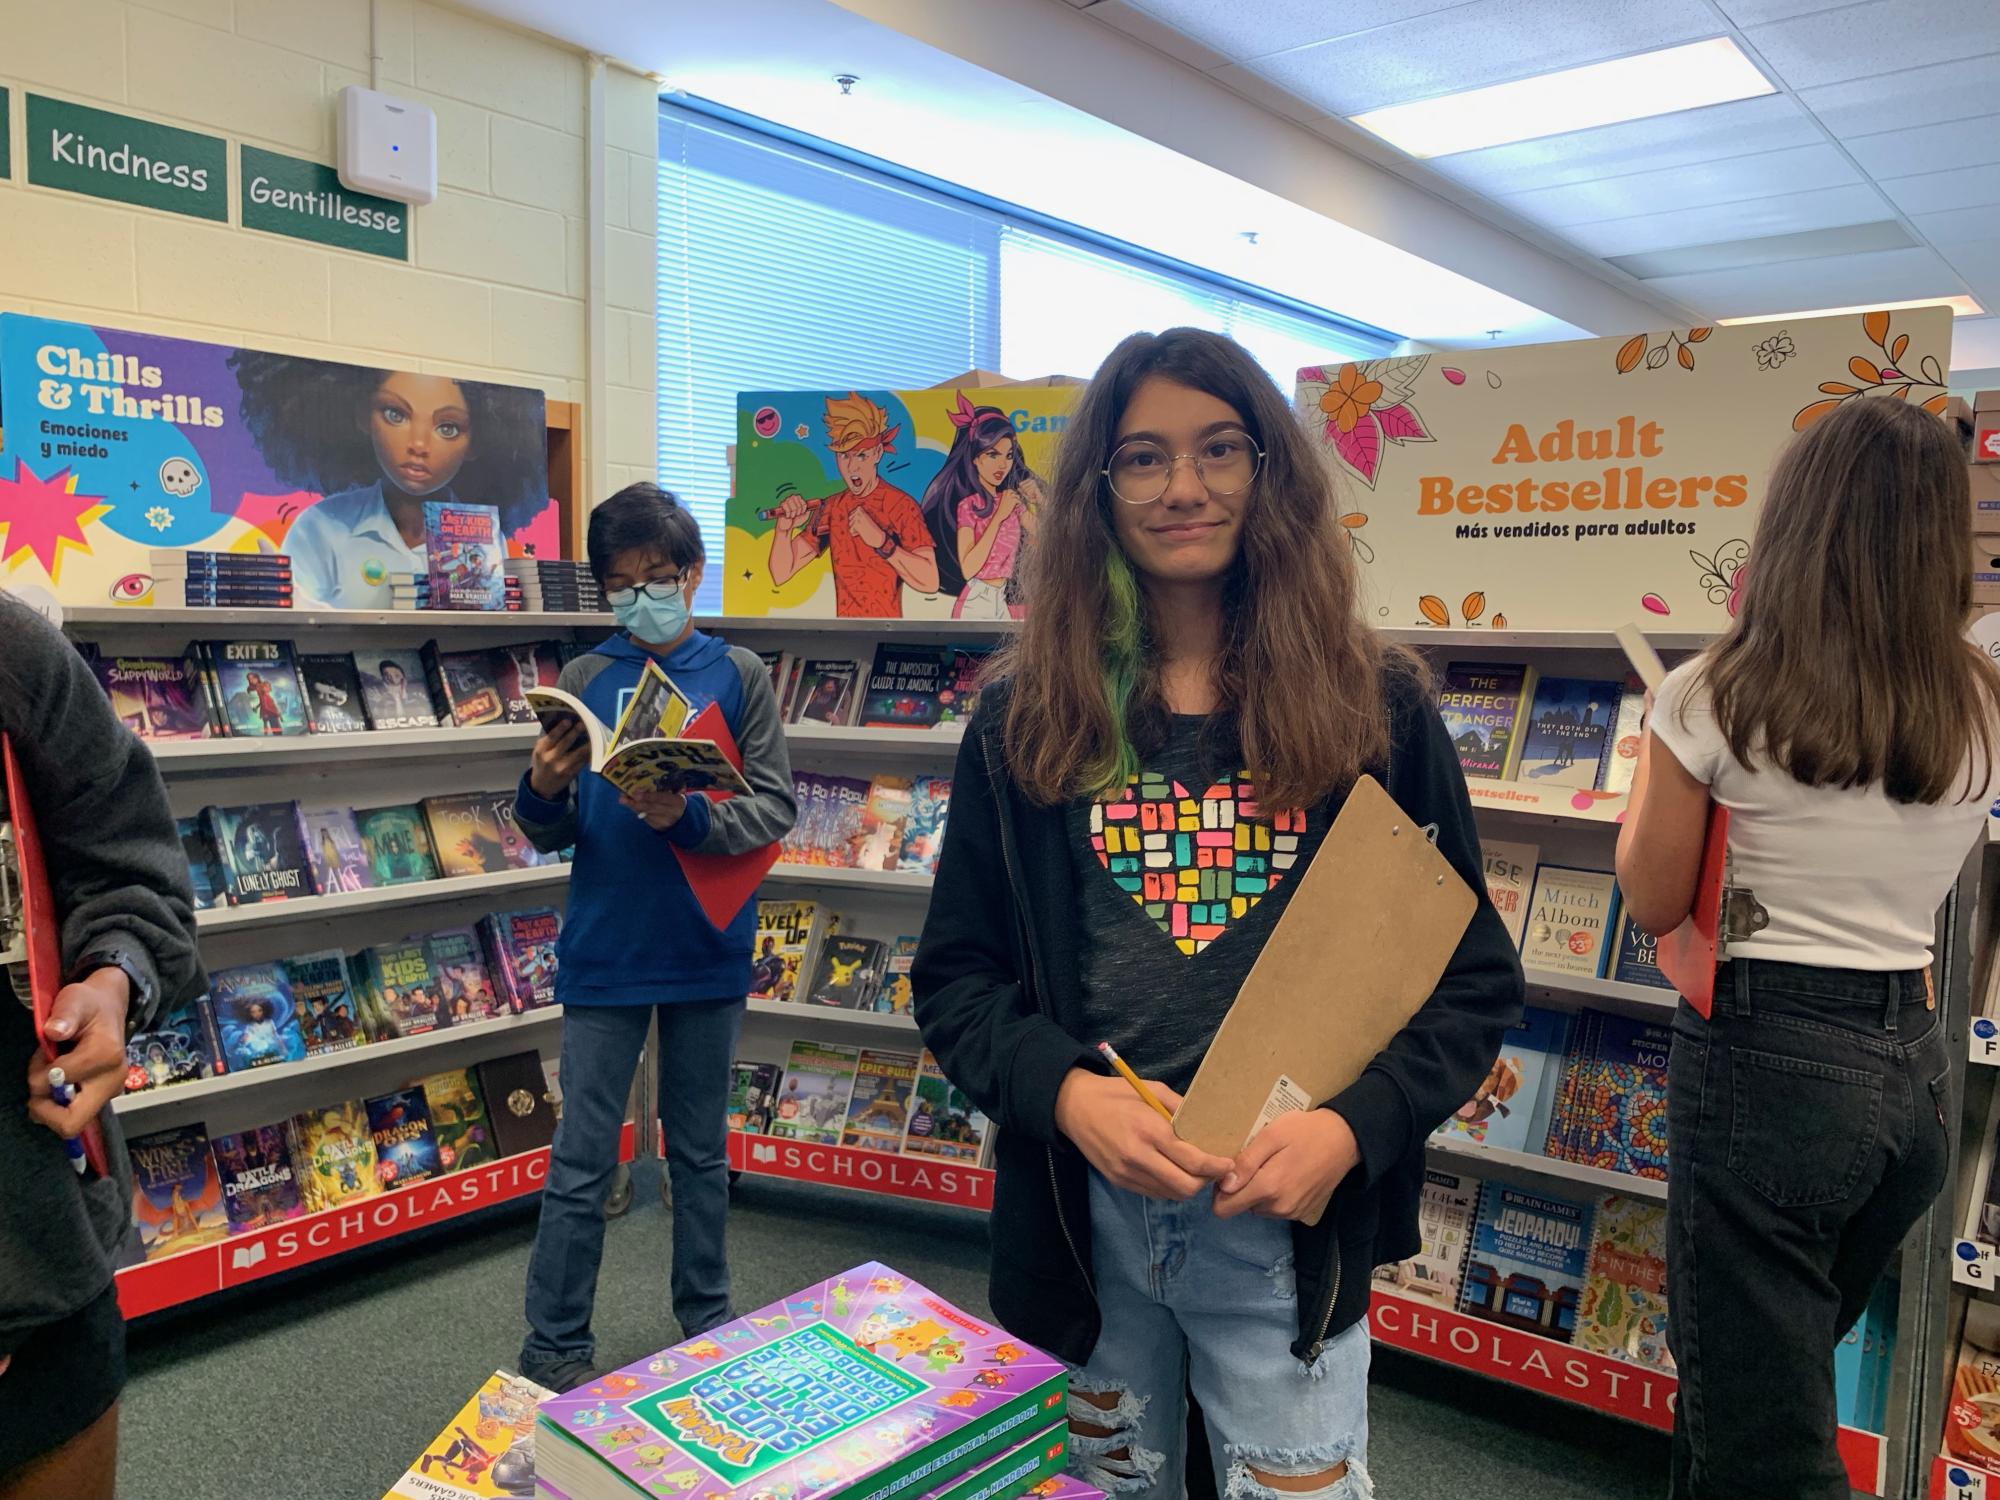 PES Fall In-Person Scholastic Book Fair - Payson Elementary School